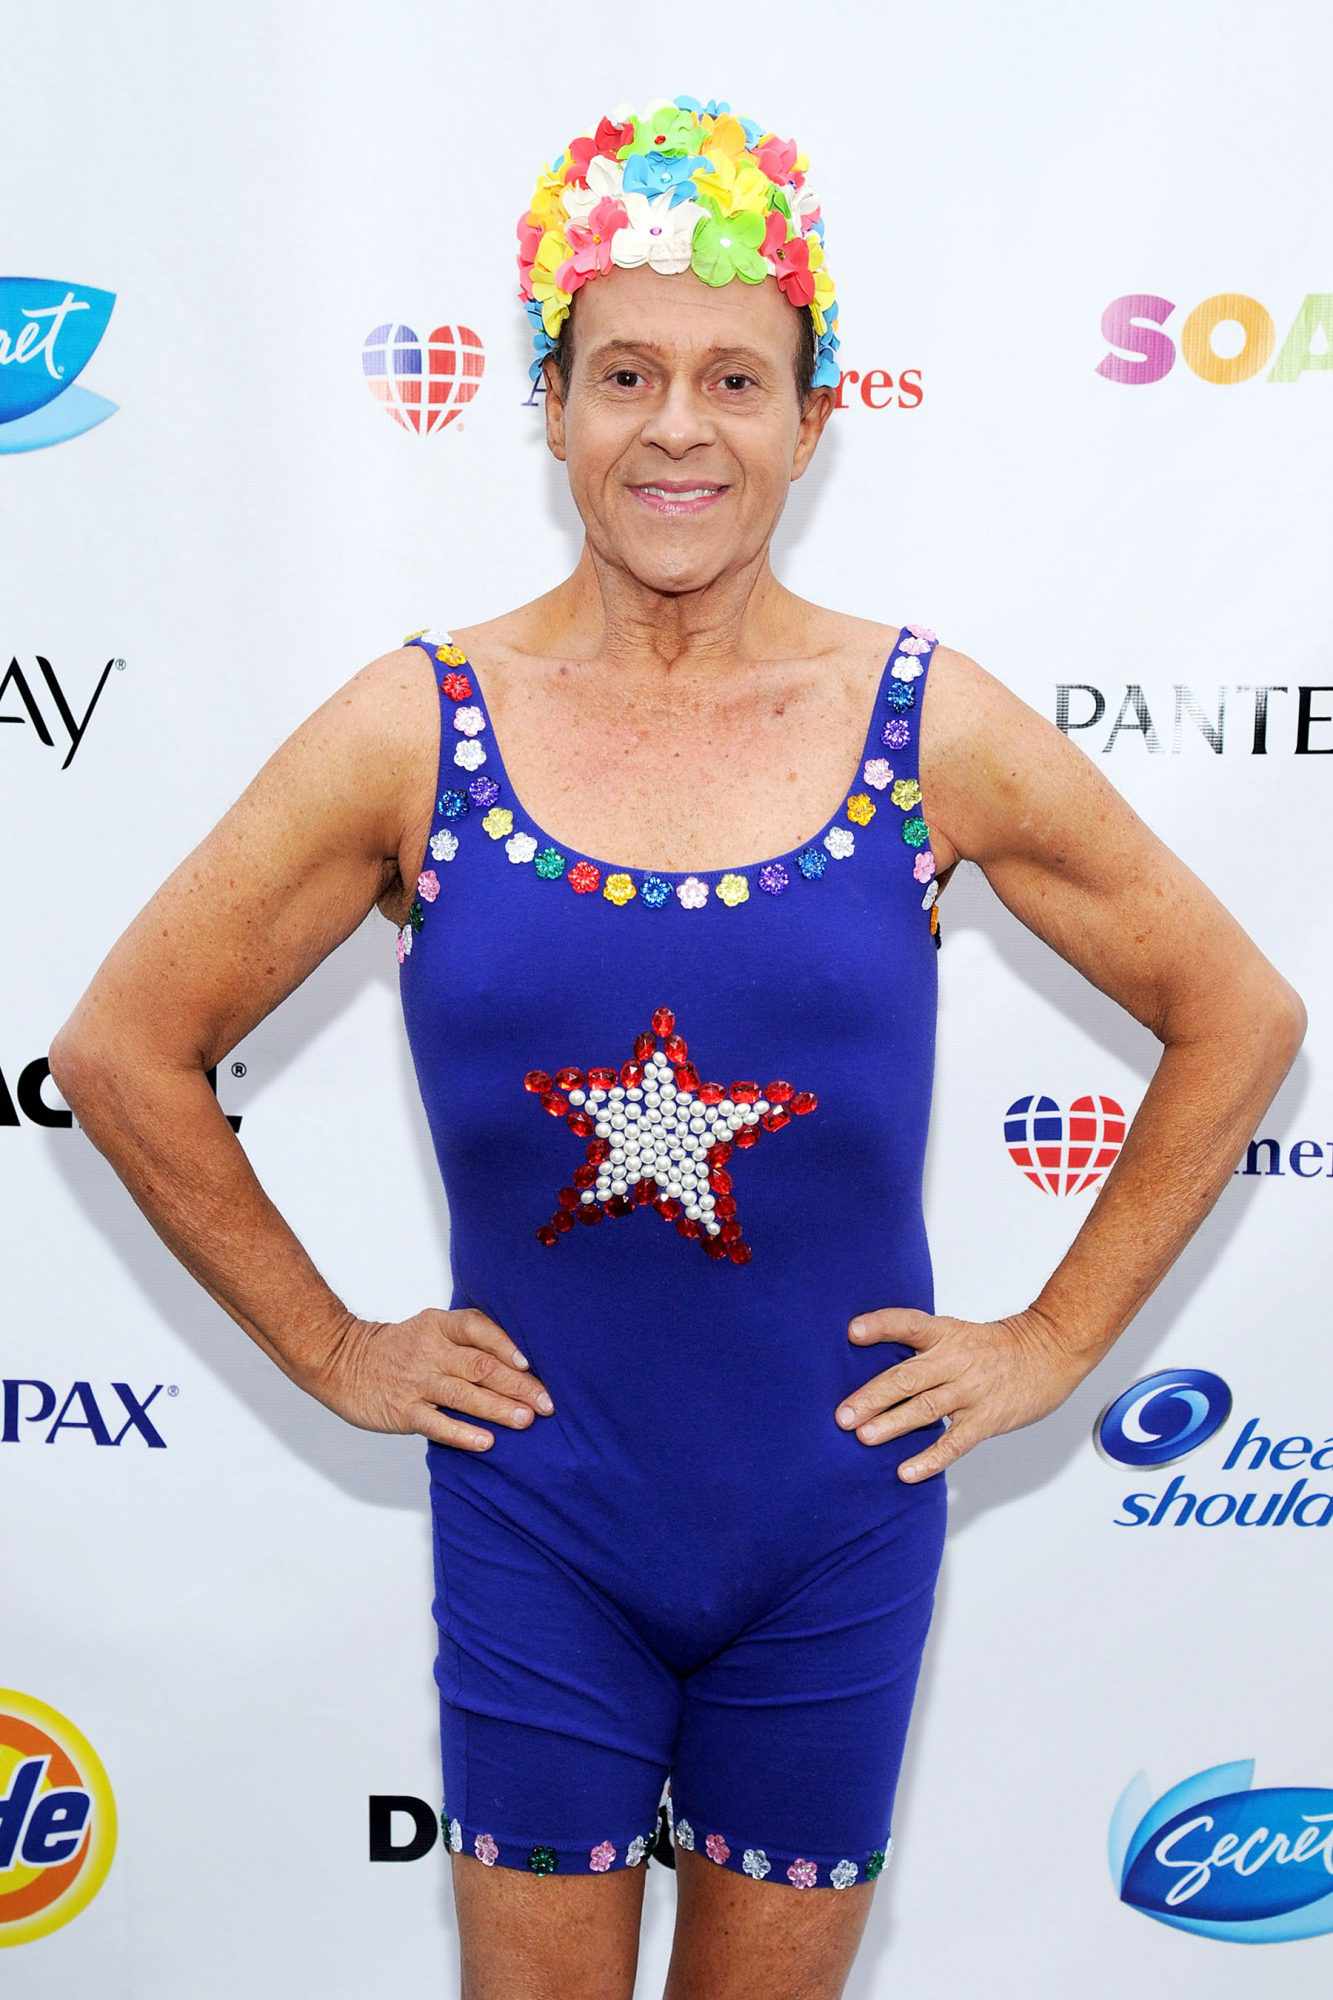 Richard Simmons at the Swim for Relief Benefiting Hurricane Sandy Recovery in New York City on Oct. 9, 2013